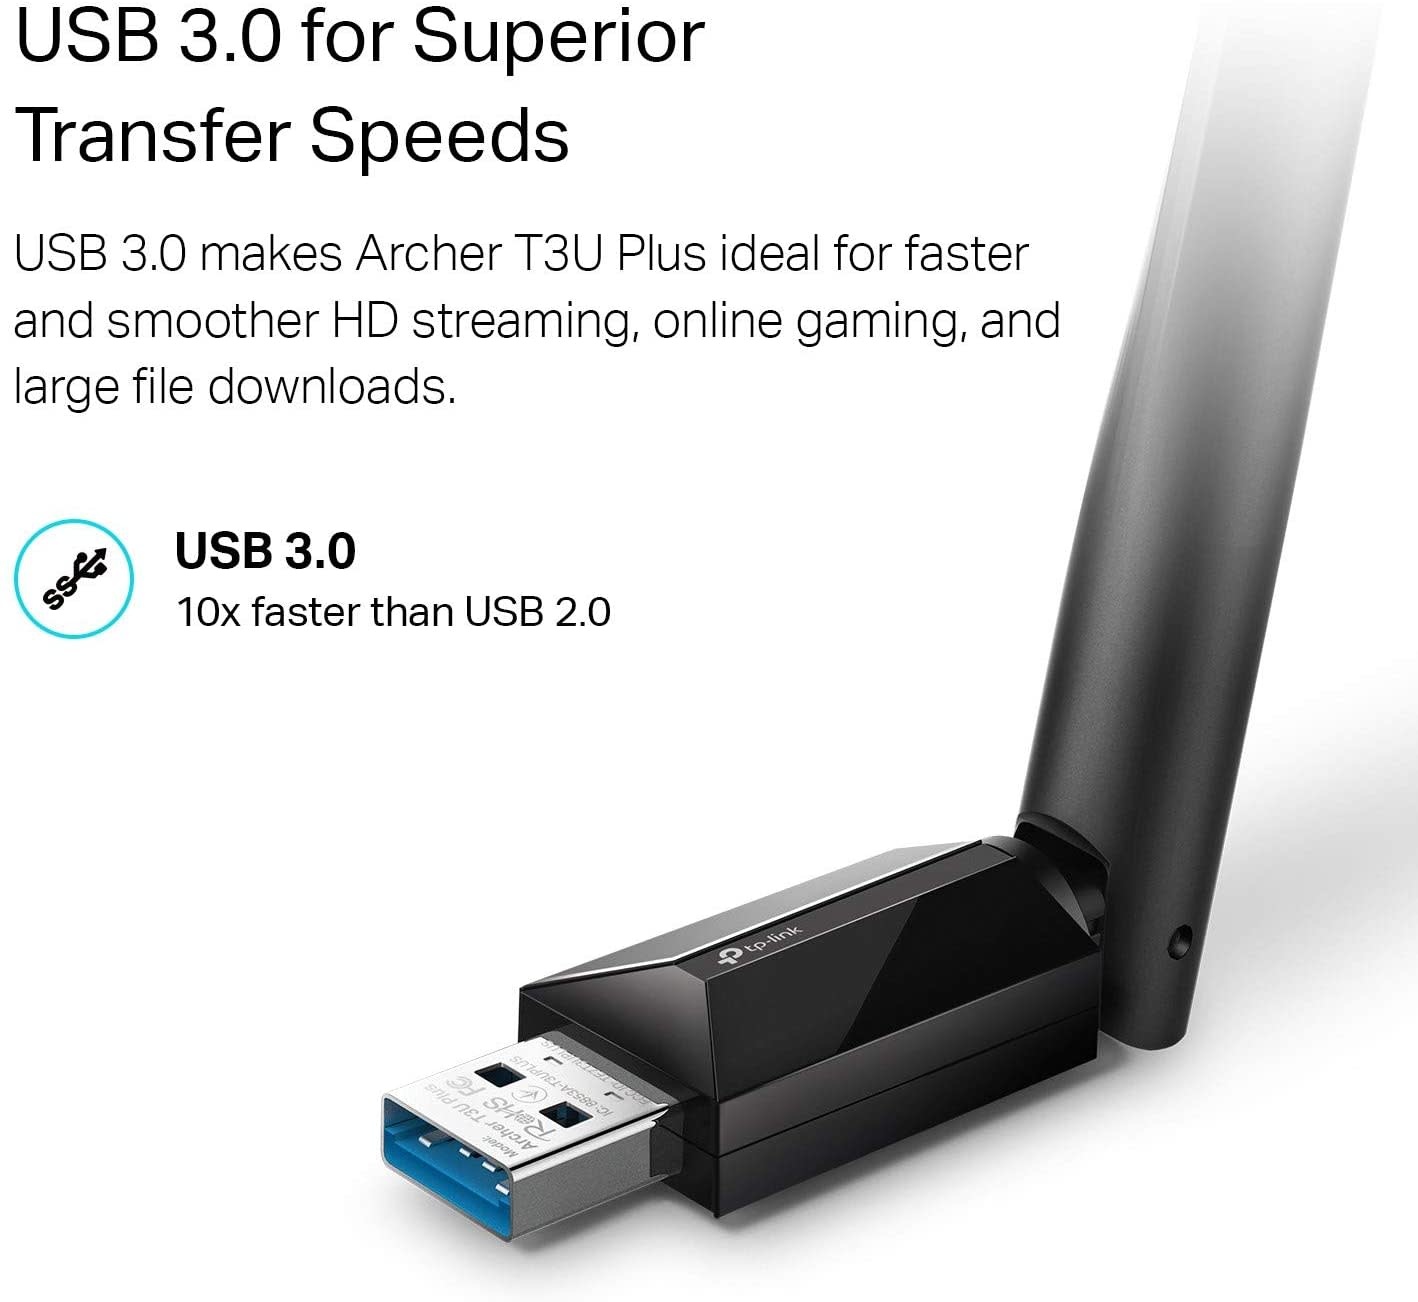 USB-WIFI-1300 -TP-Link - USB WiFi Adapter for Desktop PC, AC1300Mbps USB 3.0 WiFi Dual Band Network Adapter with 2.4GHz/5GHz High Gain T3U Plus), MU-MIMO, Windows 11/10/8.1/8/7/XP, Mac 10.9-10.15 - The